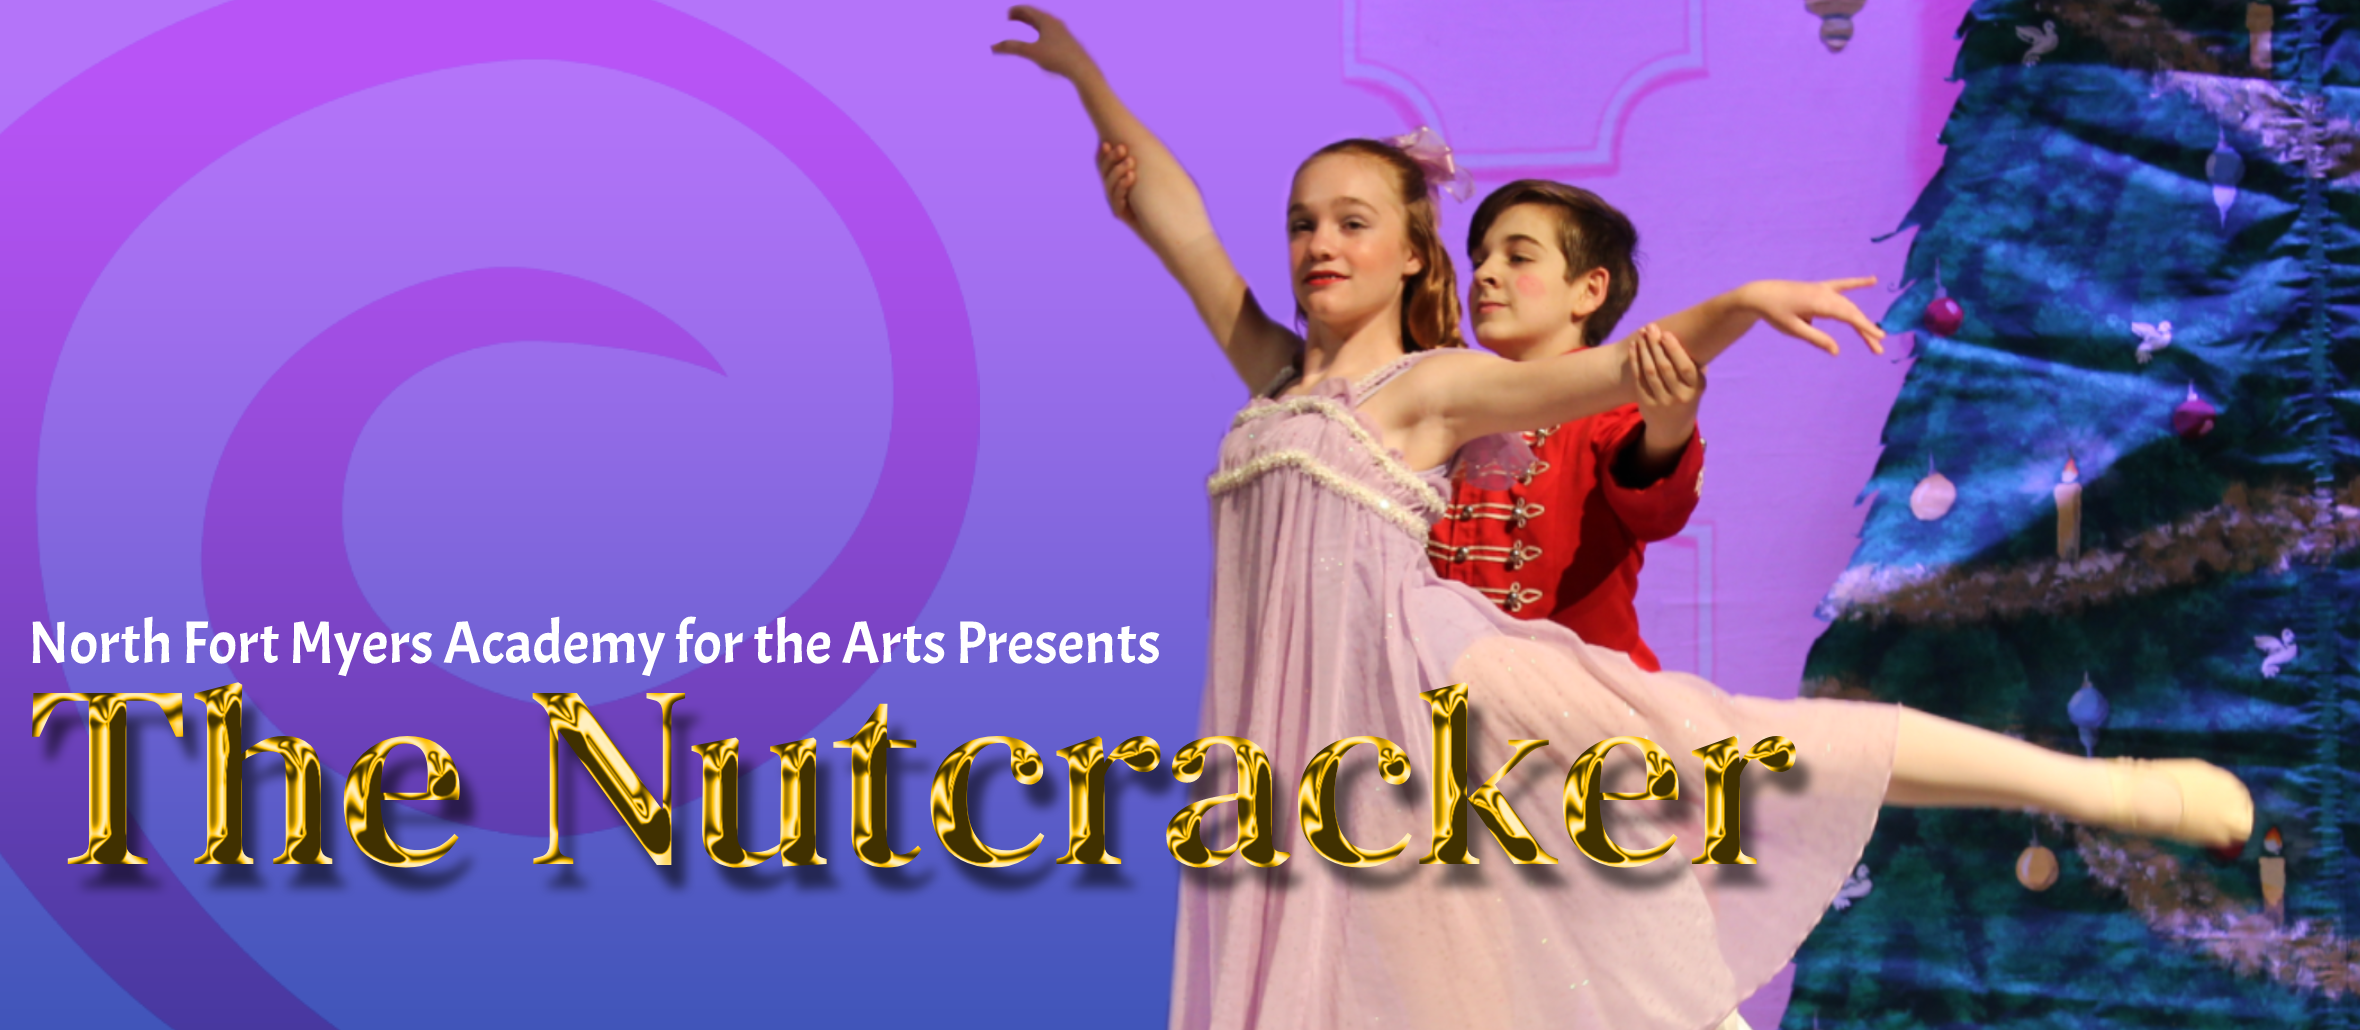 North Fort Myers Academy of the Arts: The Nutcracker